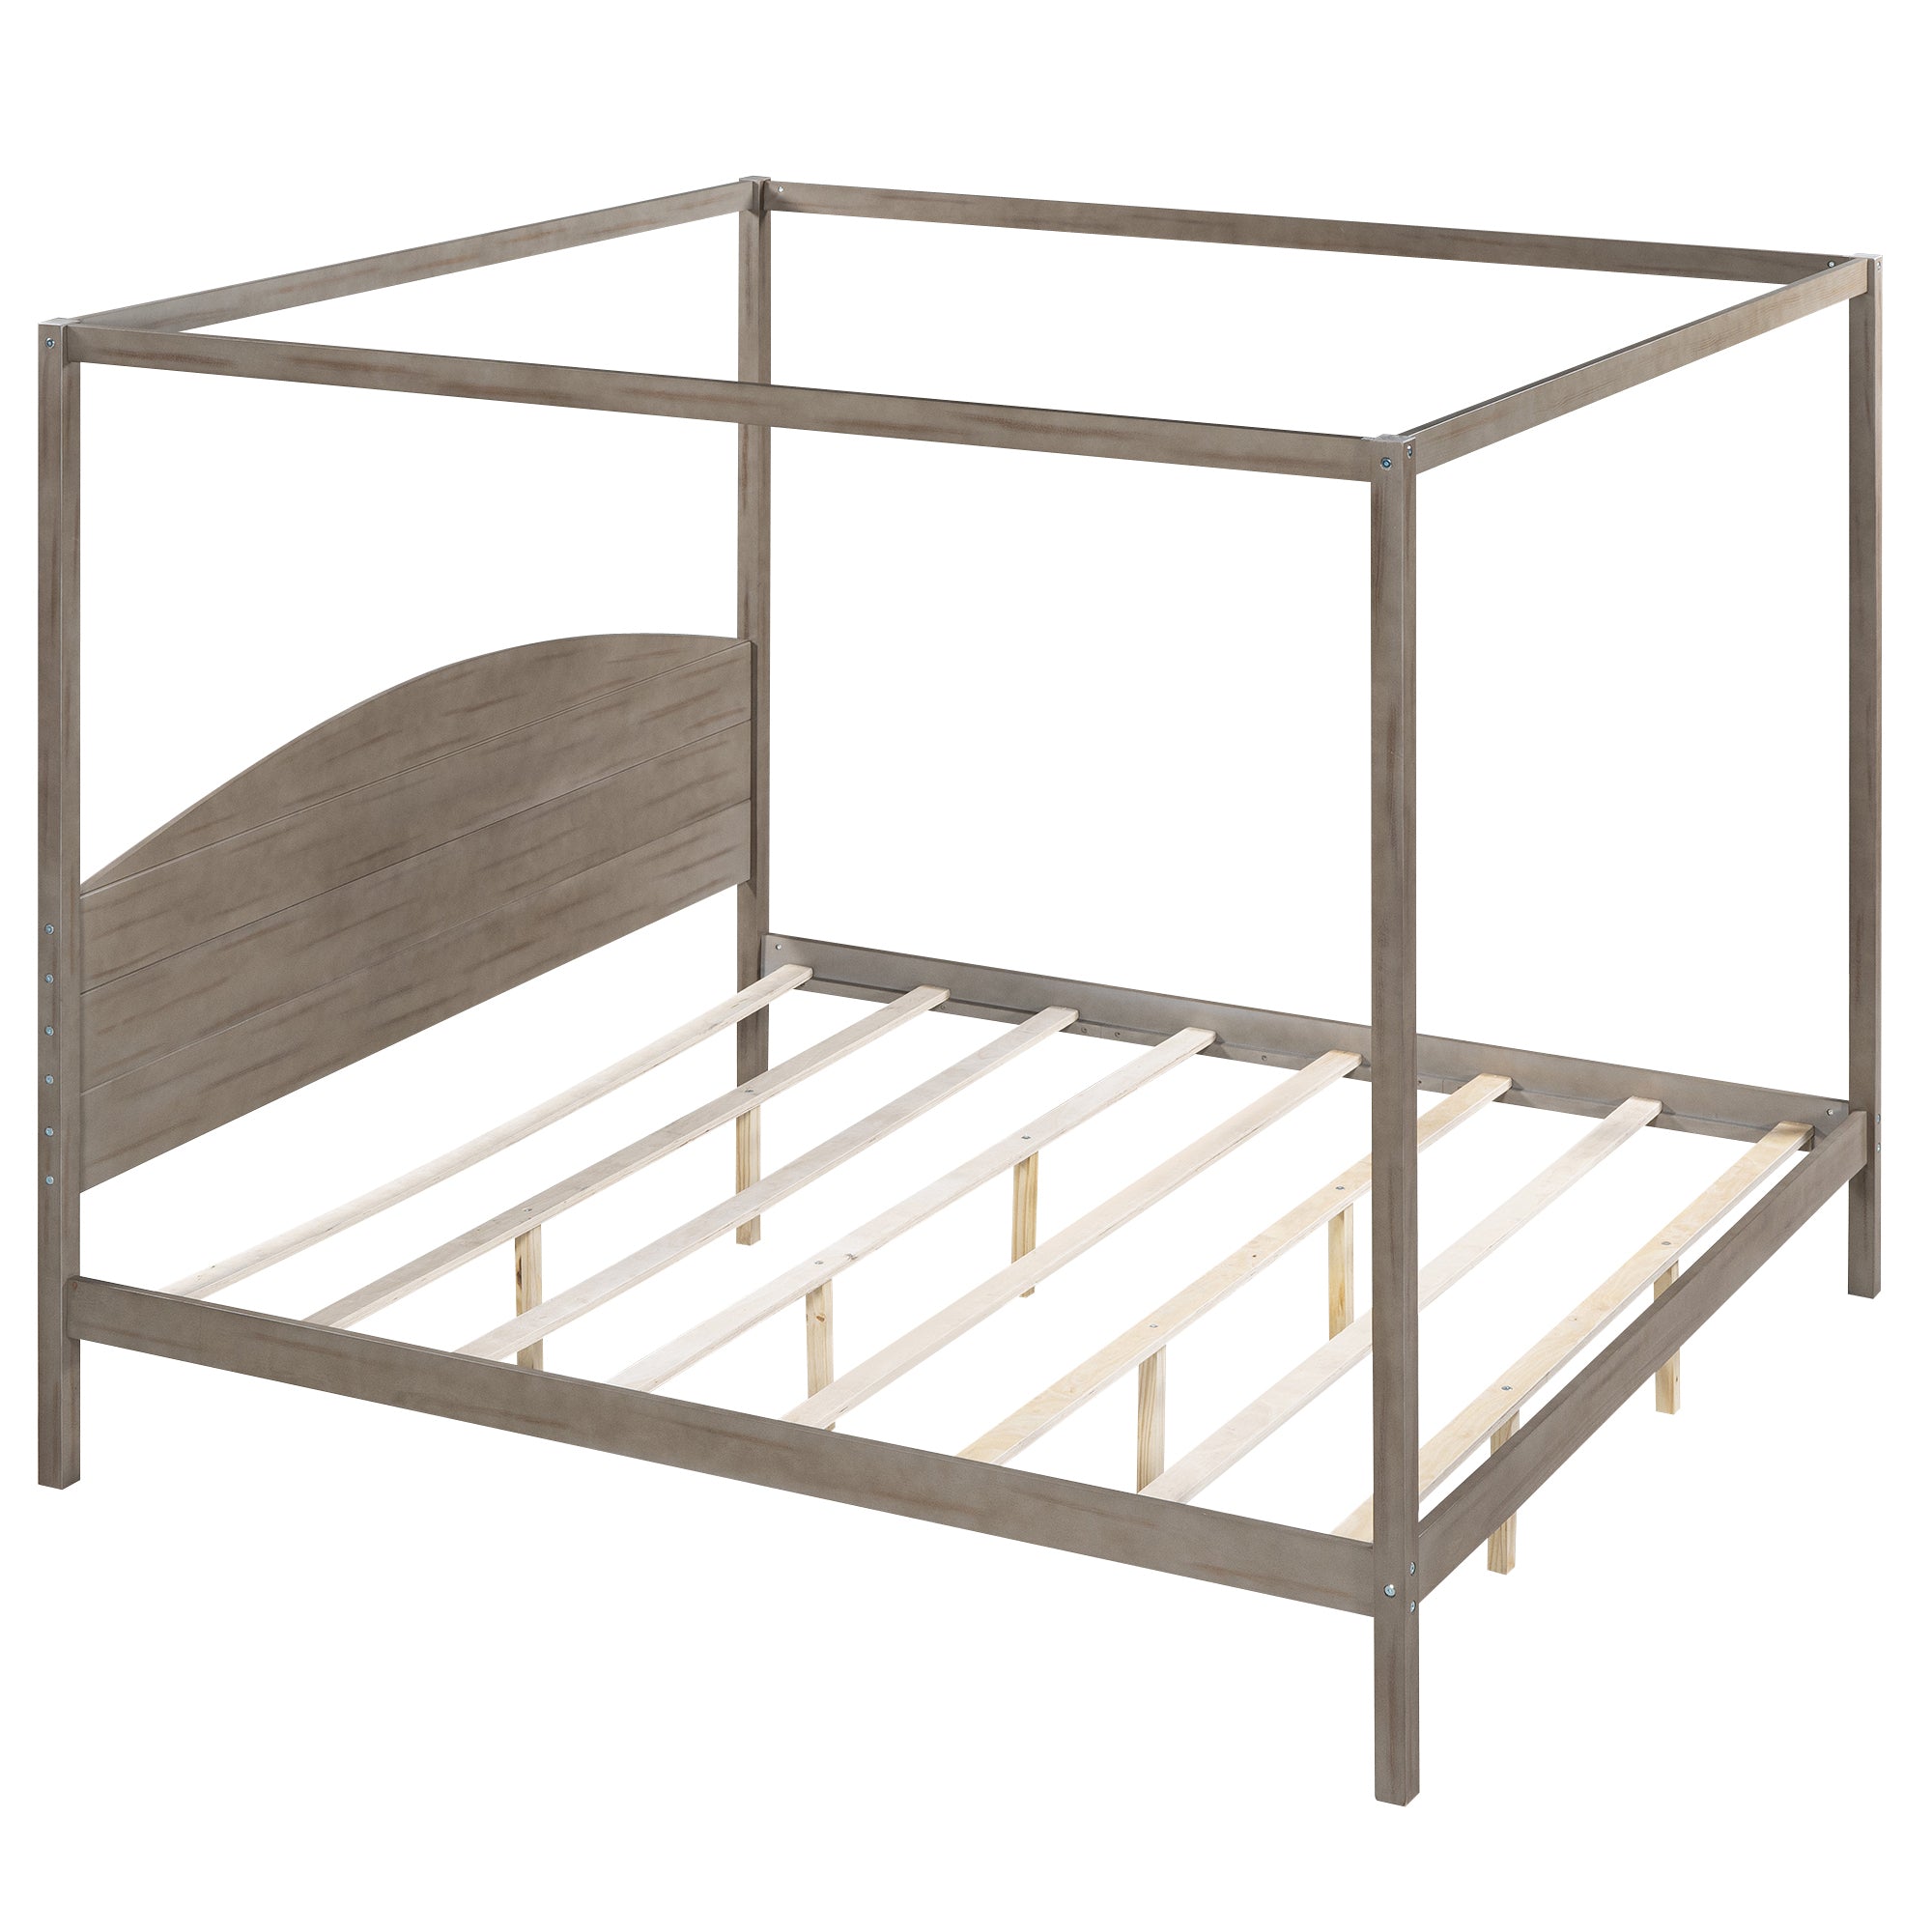 King Size Canopy Platform Bed with Headboard and Support Legs - Brown Wash